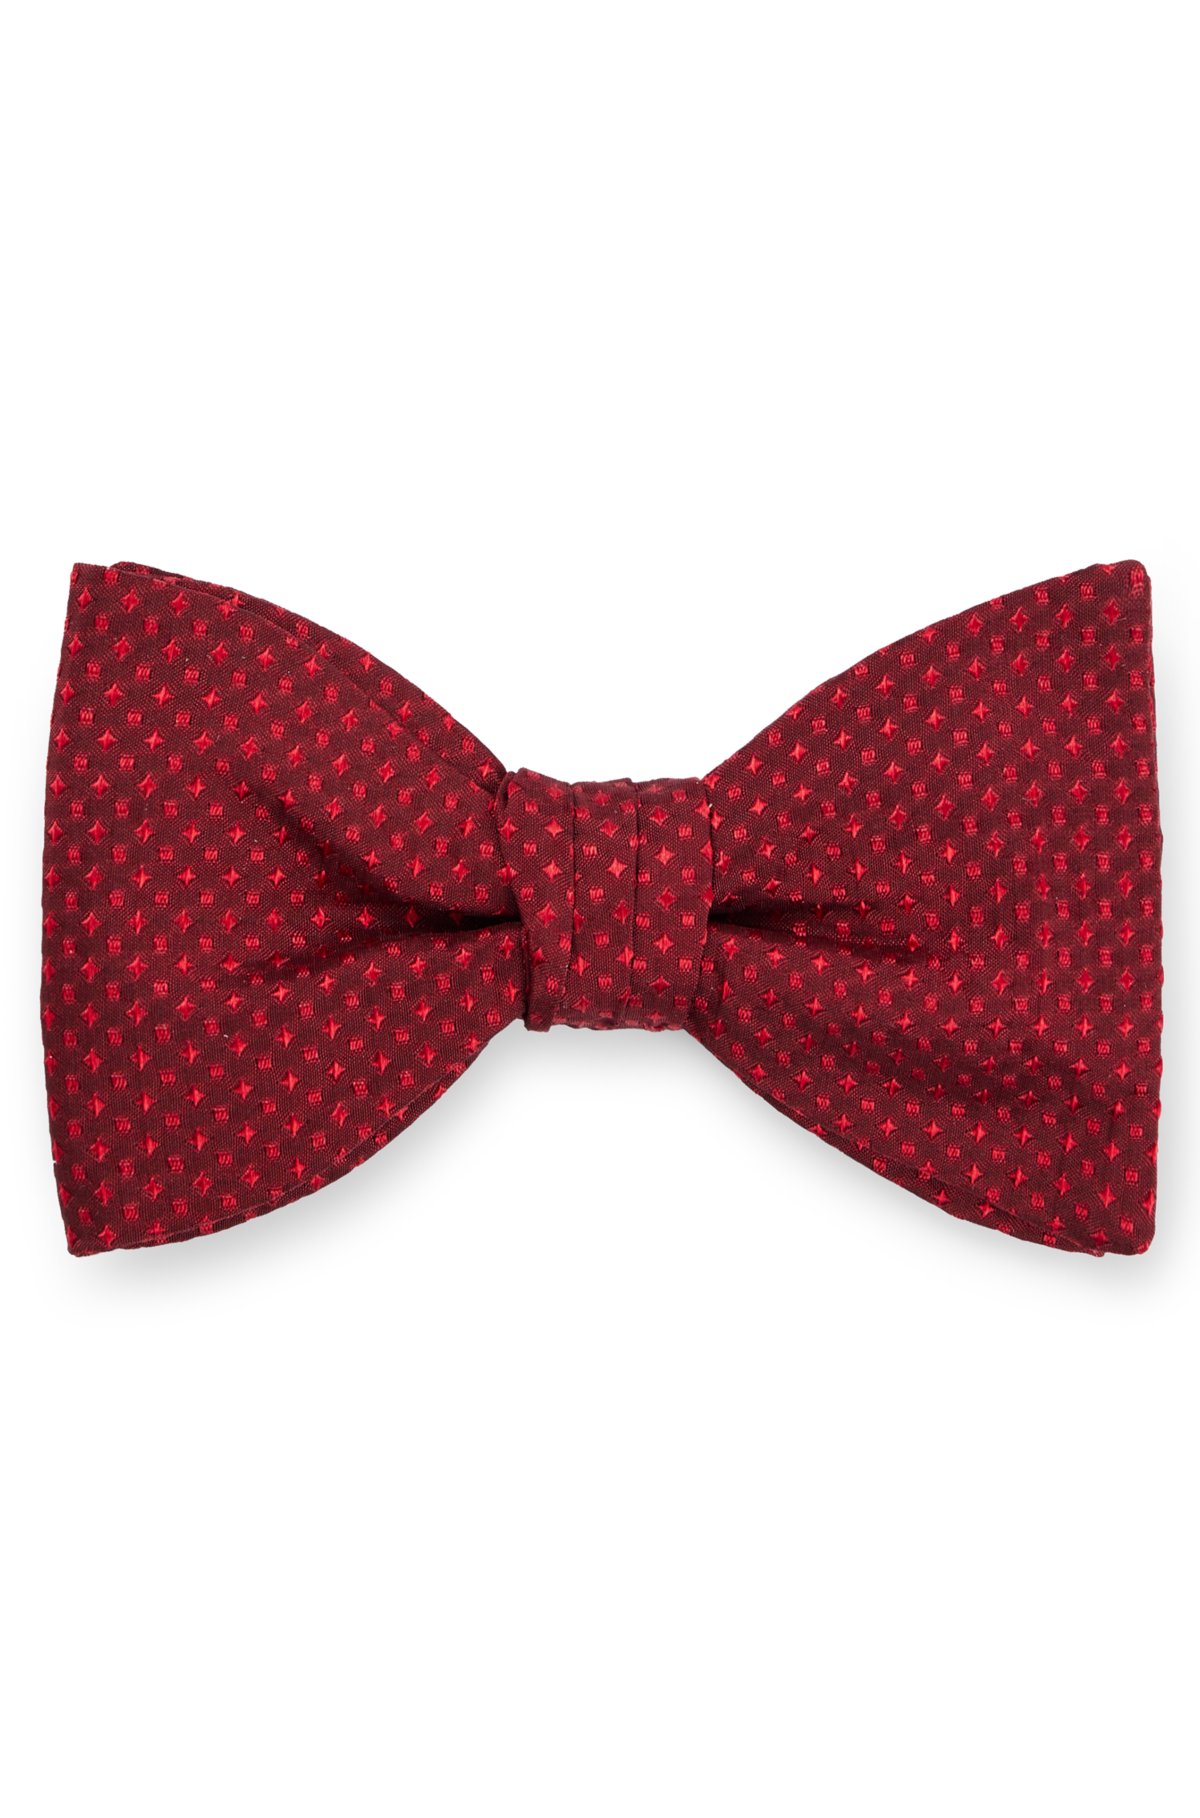 Red Bow Tie with White Polka Dots, Valentine's Day Pre-Tied Bowtie AU